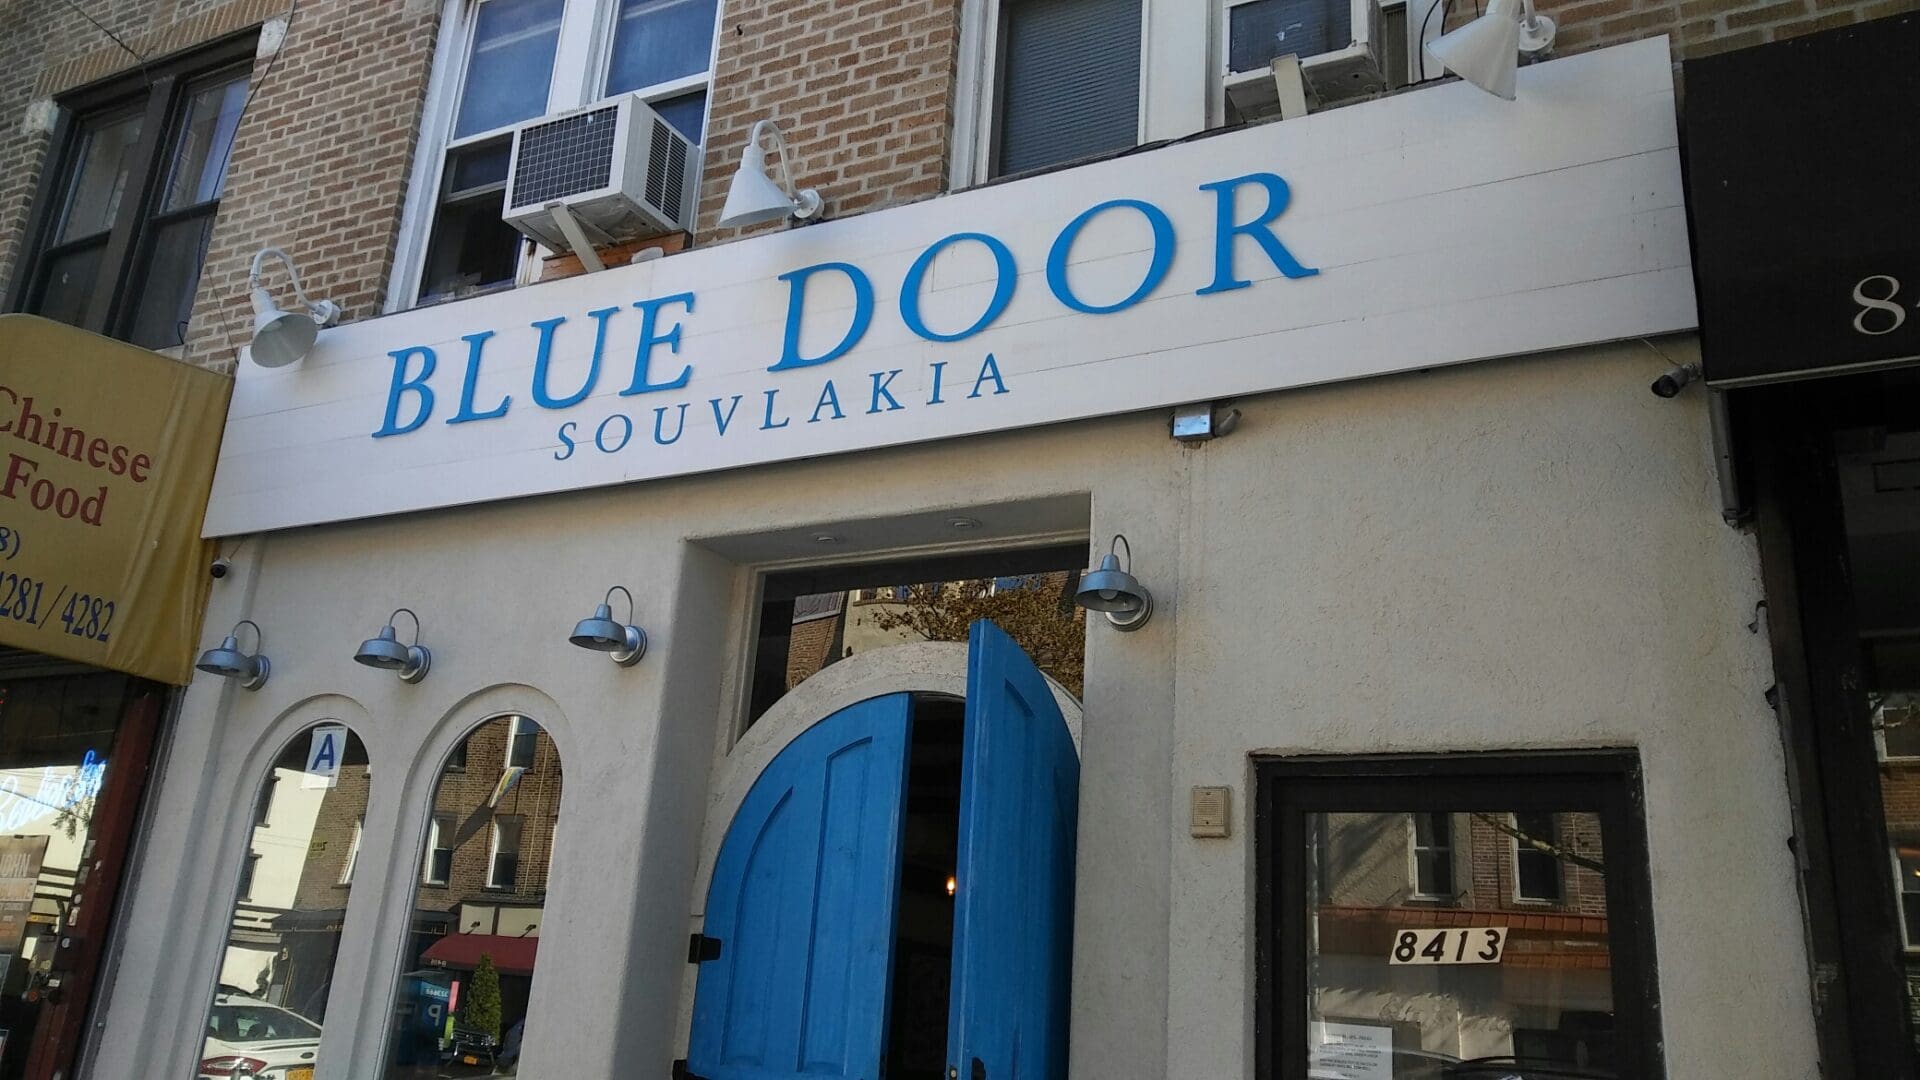 Front view of blue door souvlaki restaurant, featuring a brick facade with a bold sign above a bright blue door, flanked by arched windows in the ADP USA Solutions Gallery.